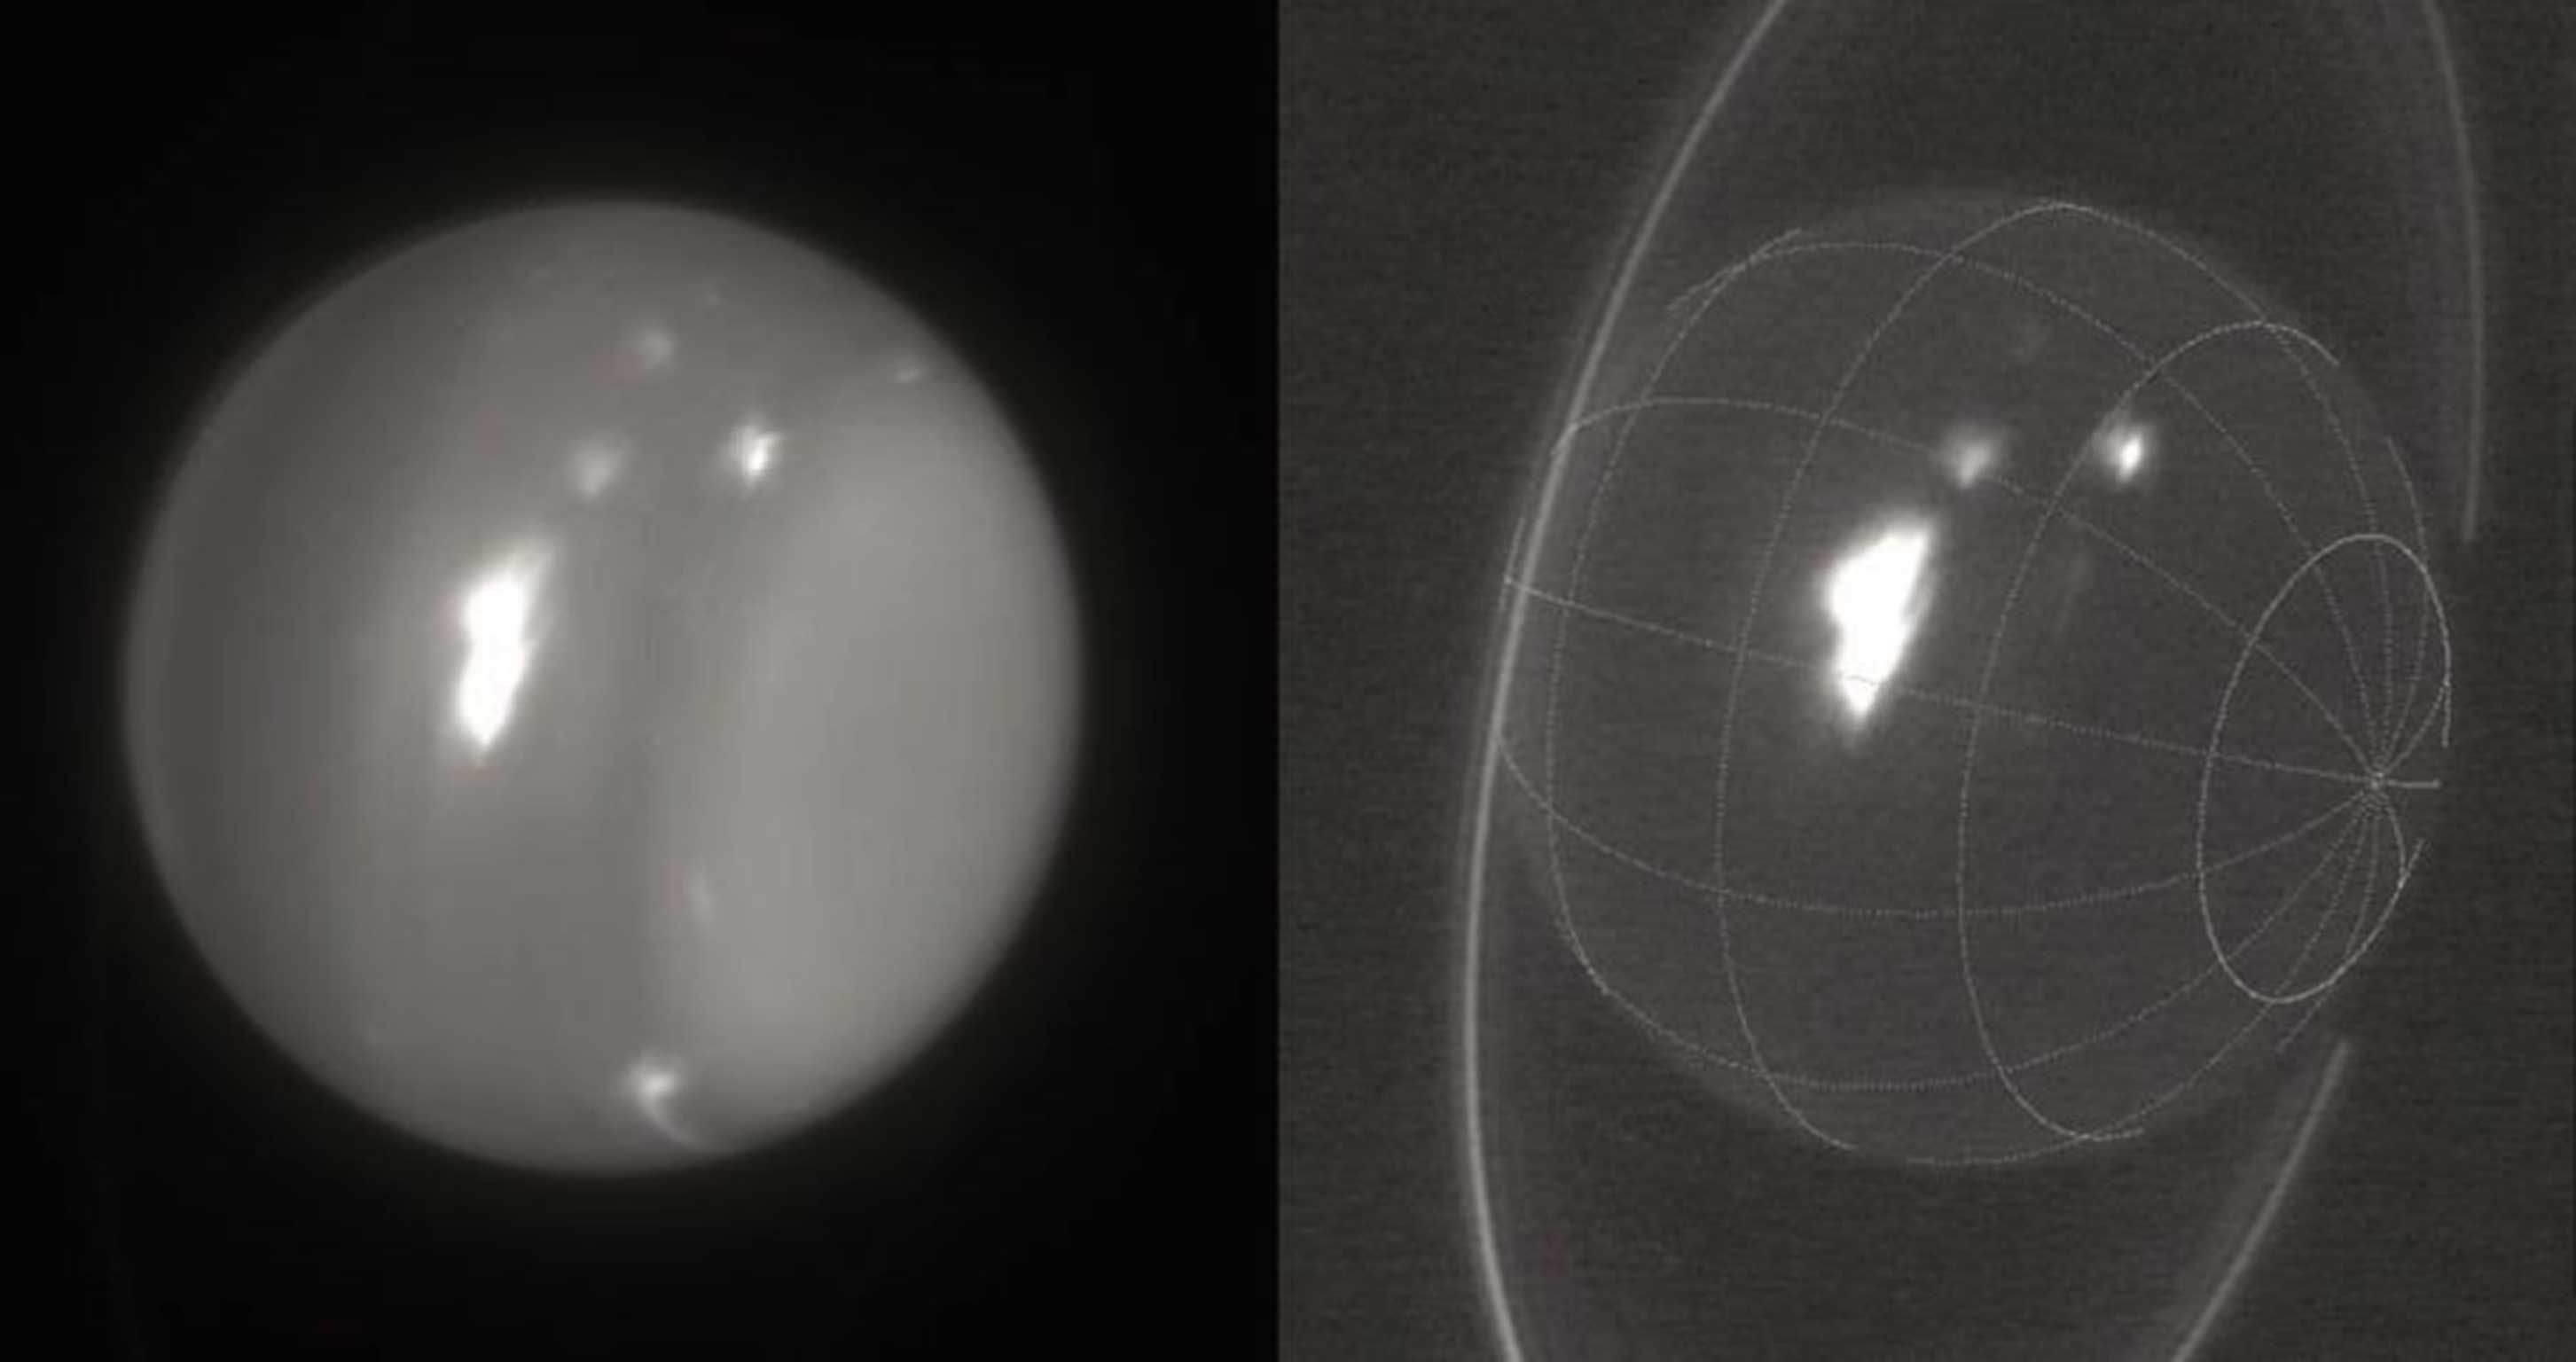 A Keck Observatory handout showing of an infrared image of Uranus with white spots - these are believed to be an extremely large storm that has excited scientists due to the normally bland surface of the ice giant planet